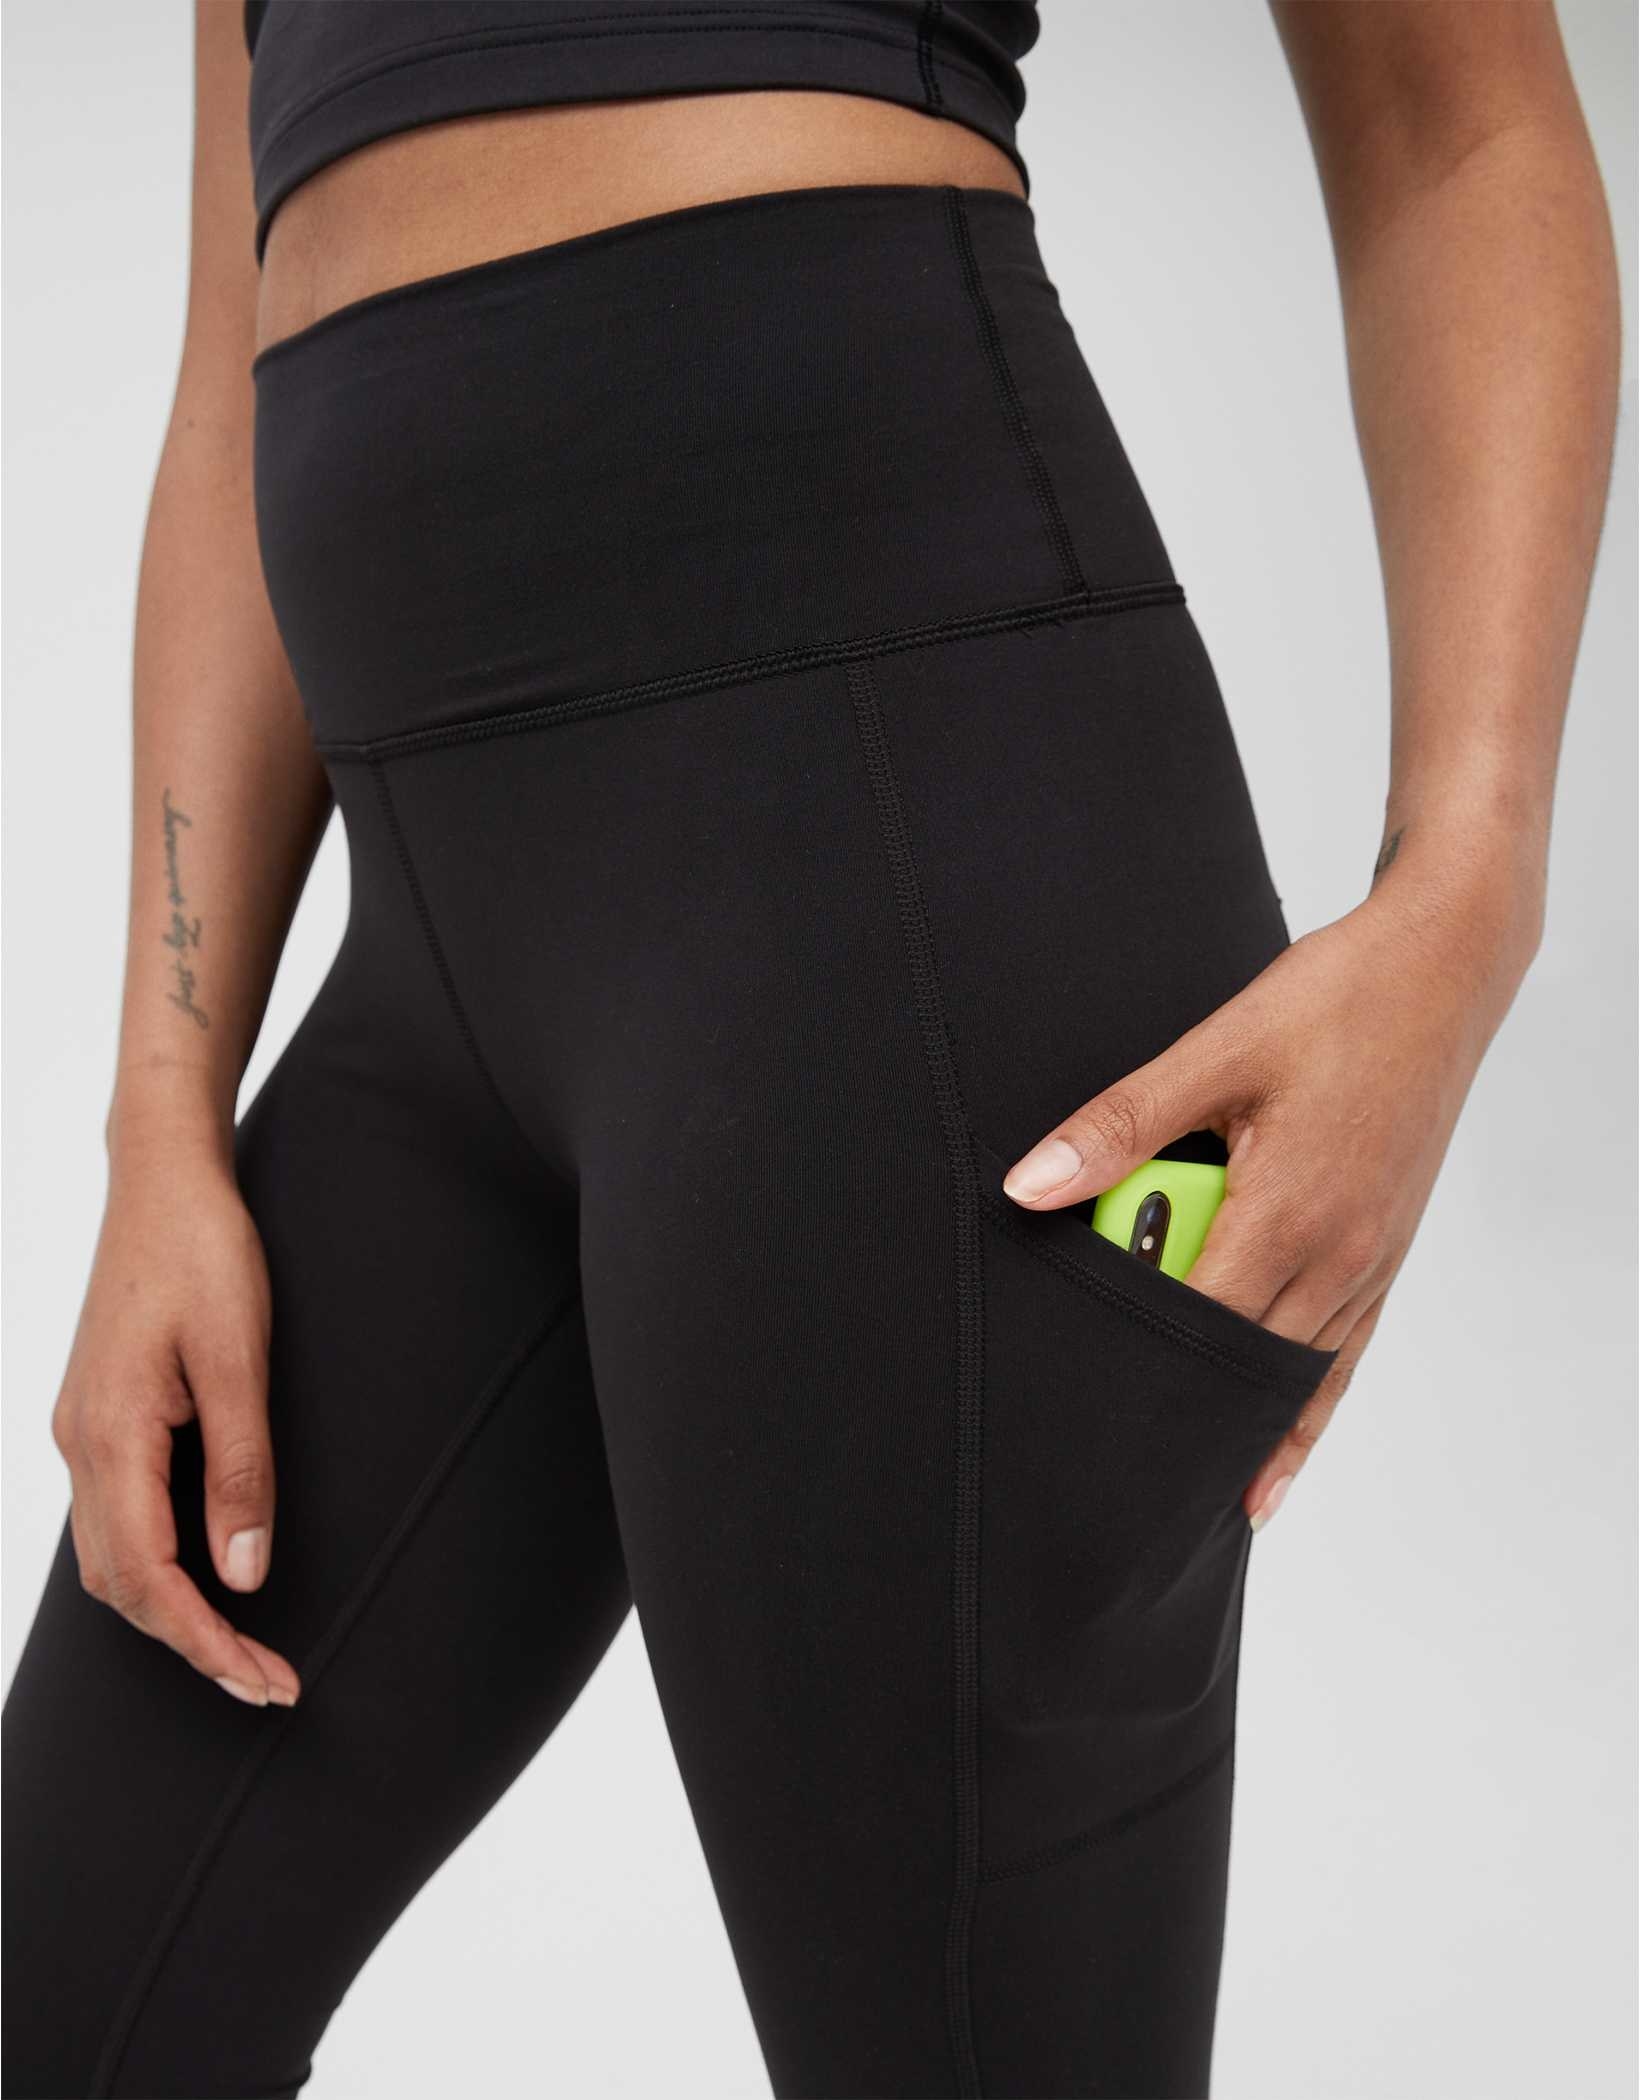 model putting cellphone into thigh pocket on the leggings